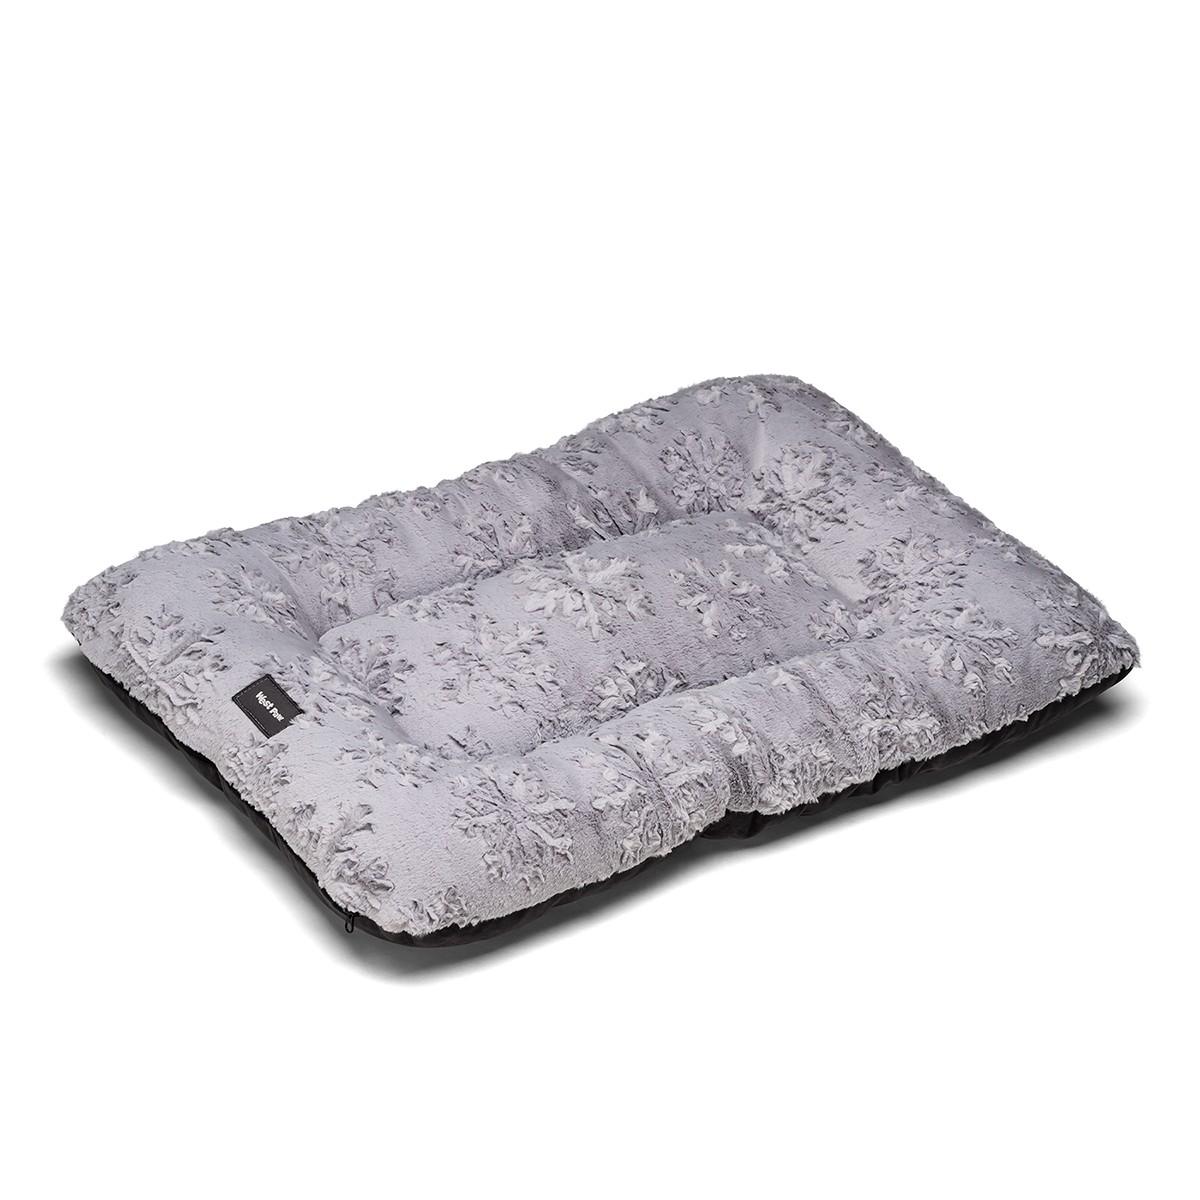 West Paw Holiday Heyday Dog Bed - Gray Snowflake